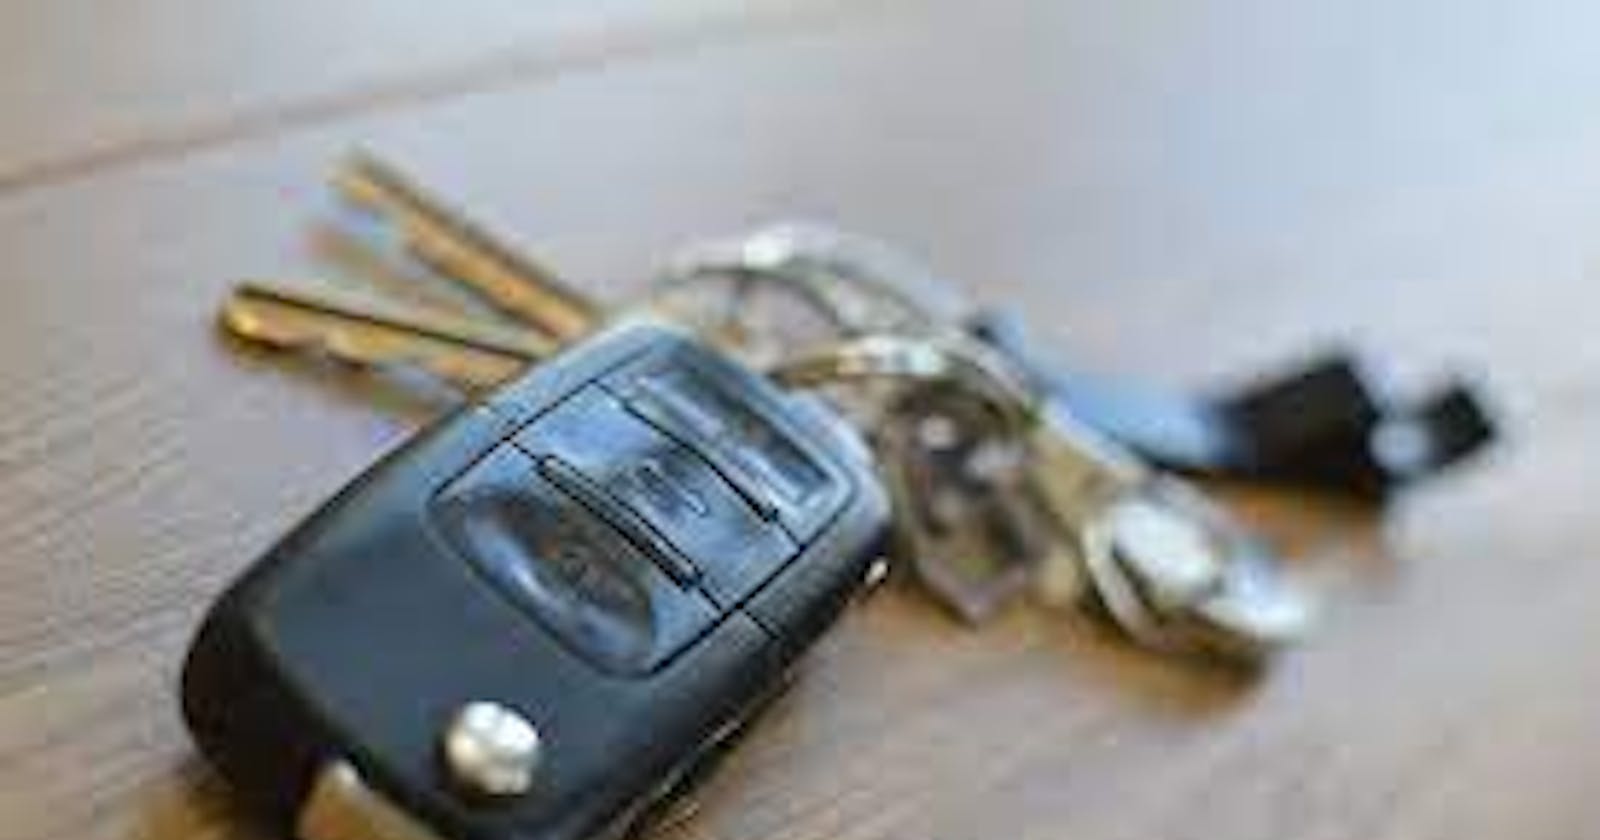 Emergency Locksmith Services: Your Trusted Lifesaver in Critical Moments